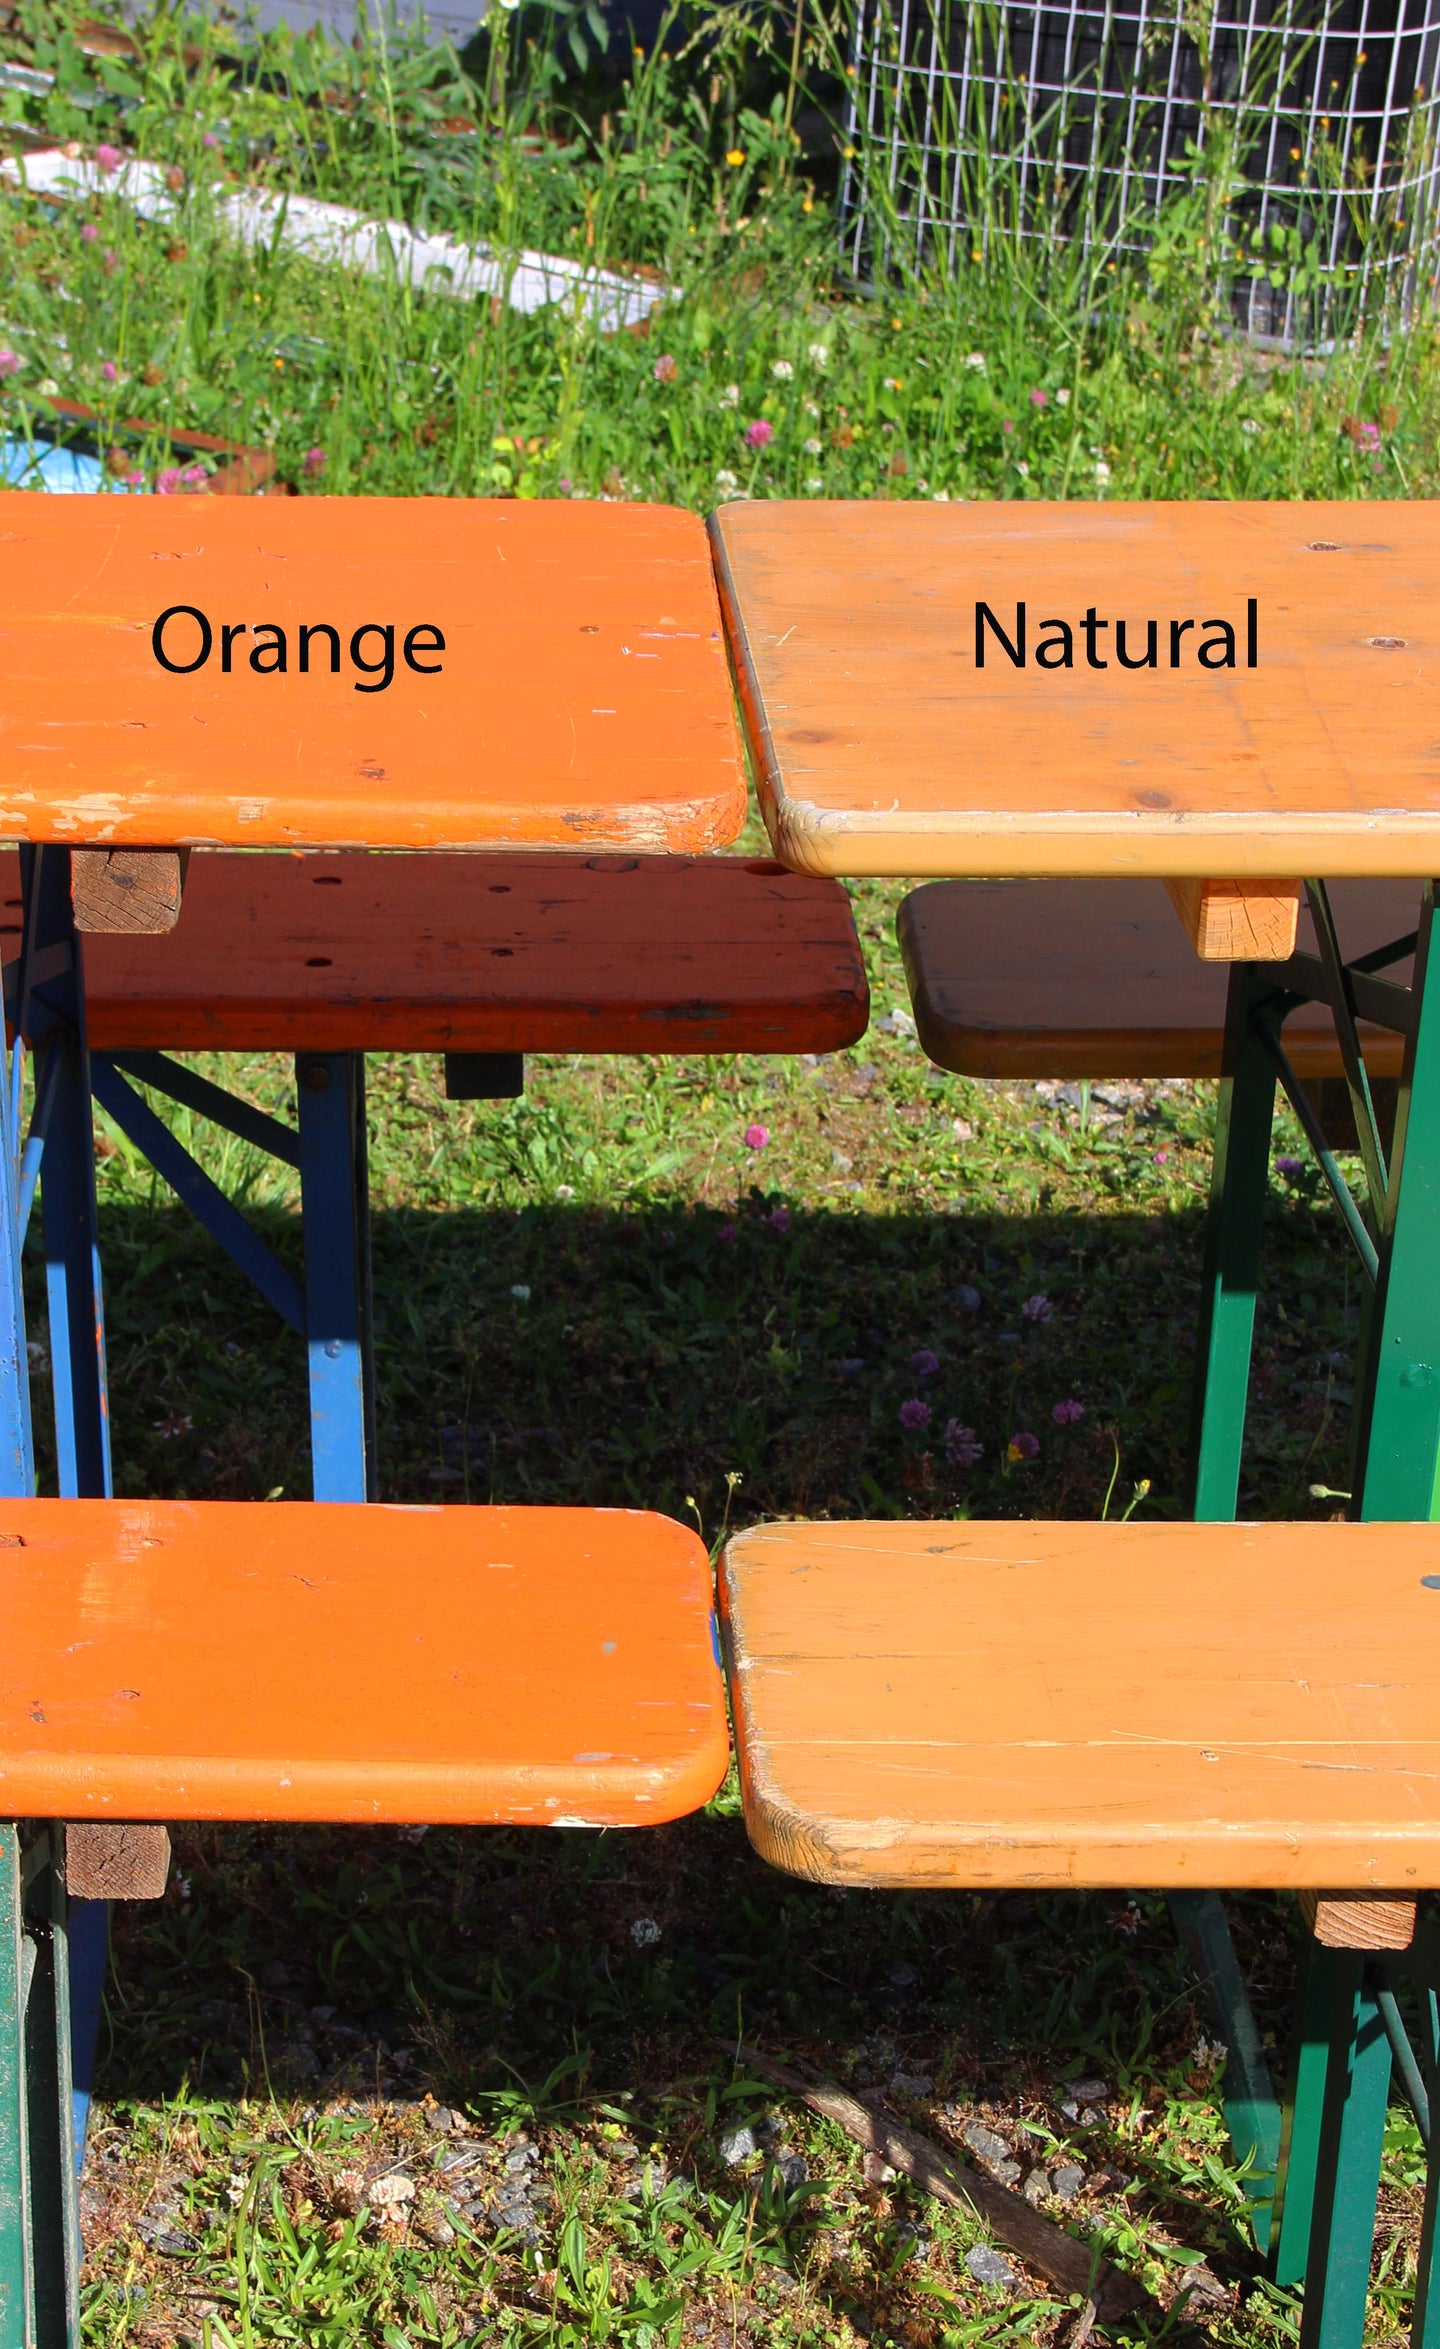 Authentic Beer Garden Bench from Germany, Octoberfest.